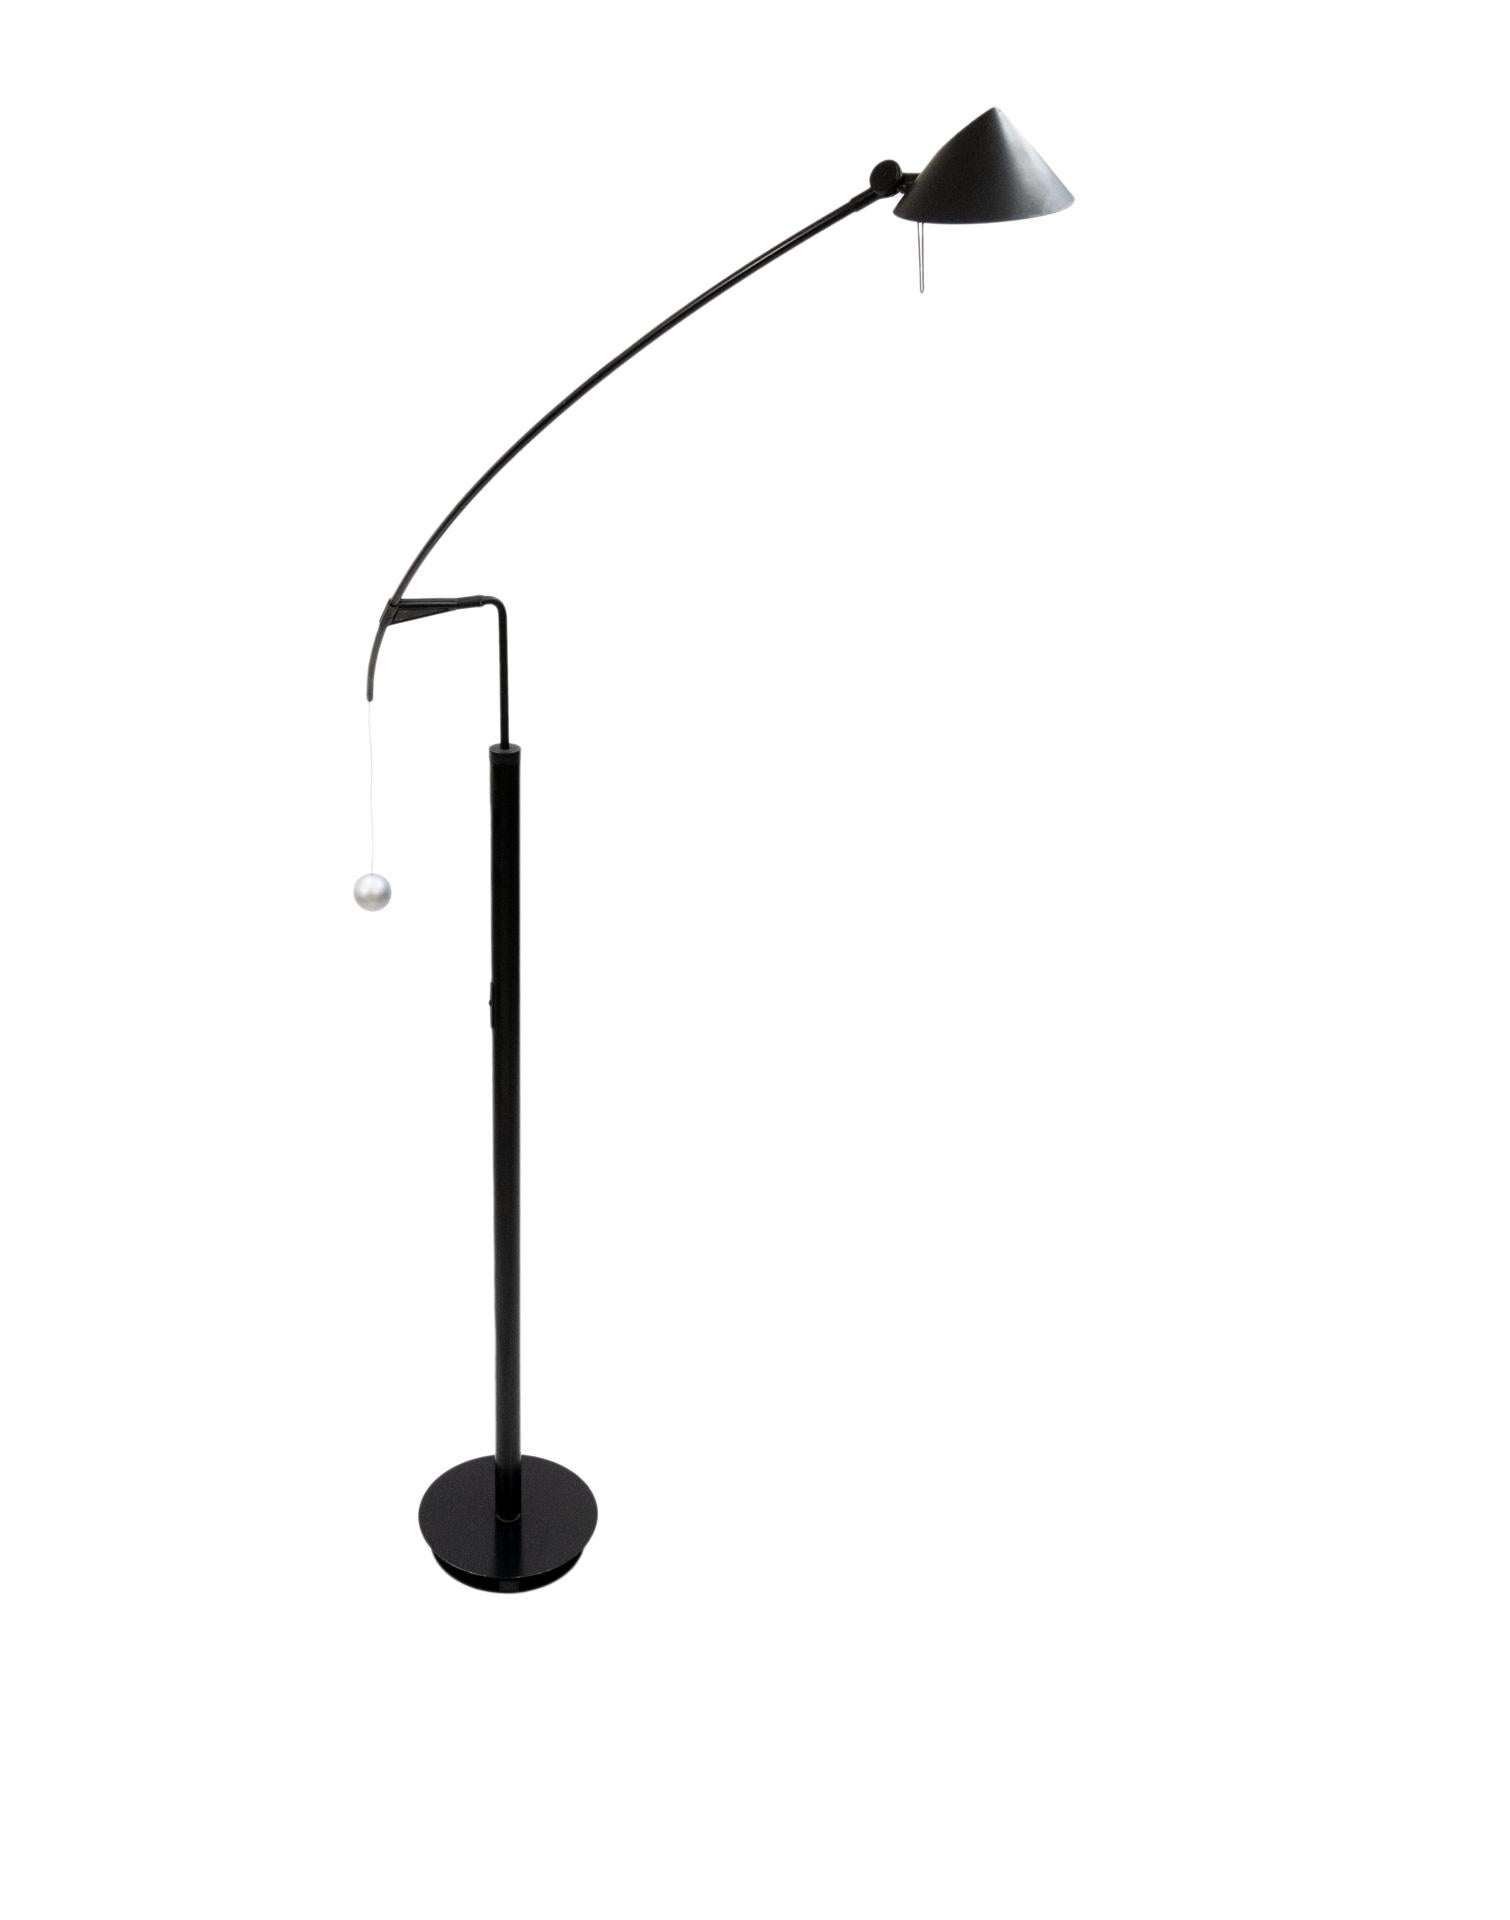 Very nice designed floor lamp. Adjustable in any direction you want. Halogen comes
with a build in dimmer. Counter weight using a solid steel ball, 1989
It is labeled underneath the base: Artemide Milano Modelo Nestore Lettura Design Carlo